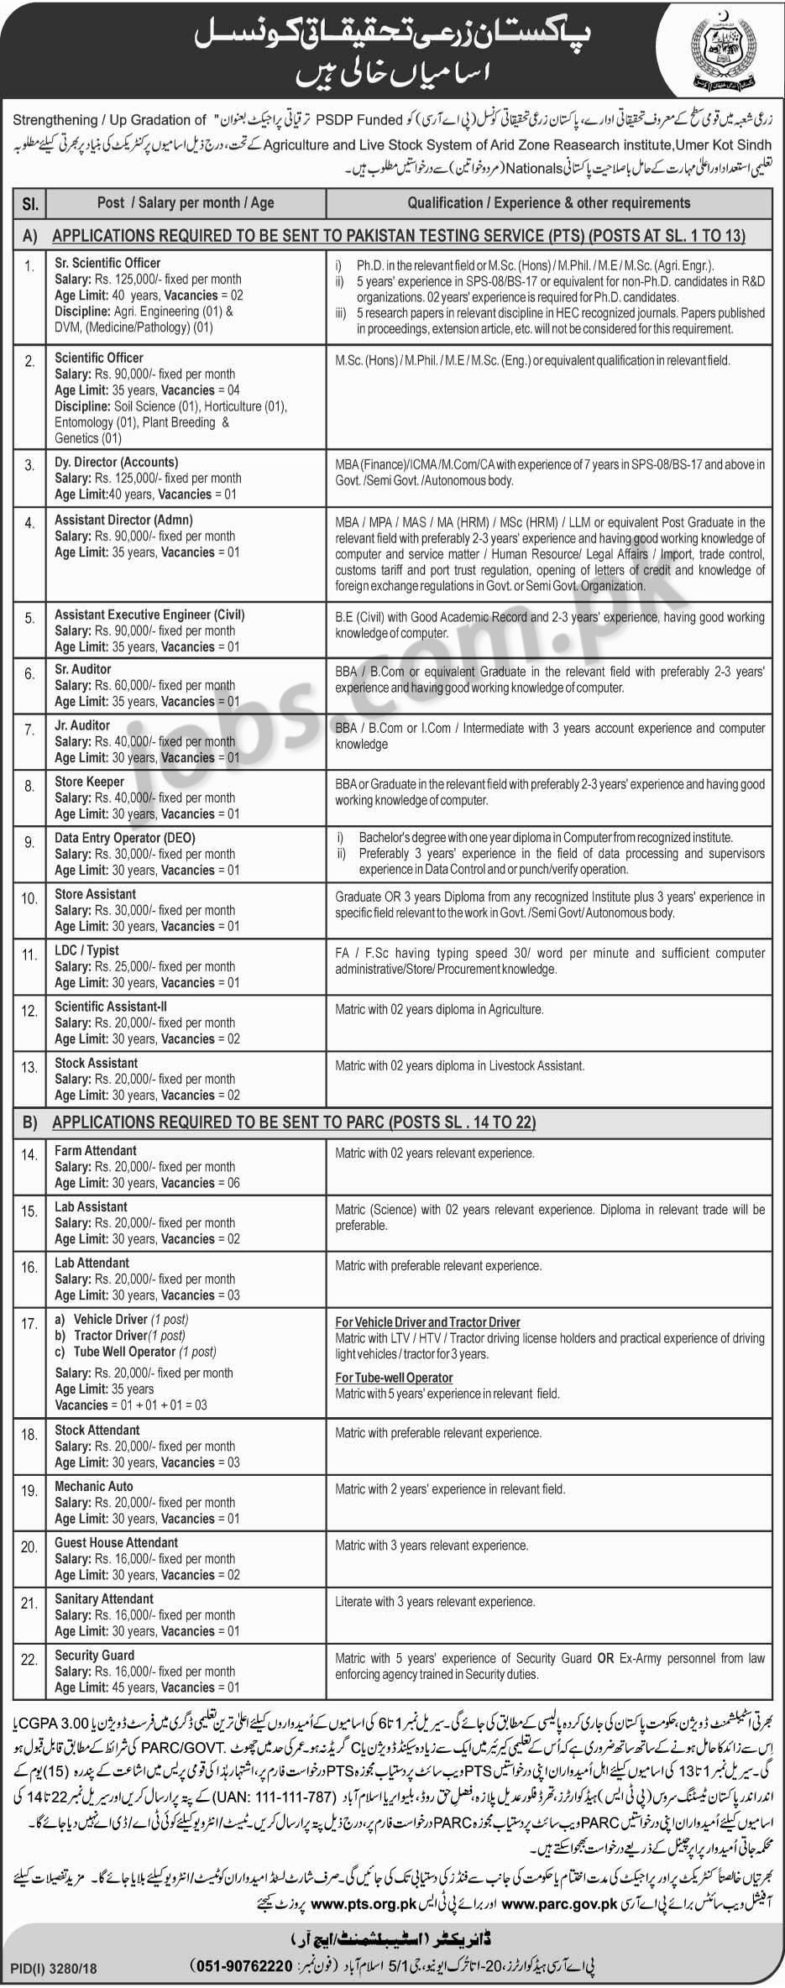 PARC Jobs 2019 for 40+ Scientific Officers/Assistants, DEO, Admin, Engineering, Clerks & Other Posts (Download PTS Form)